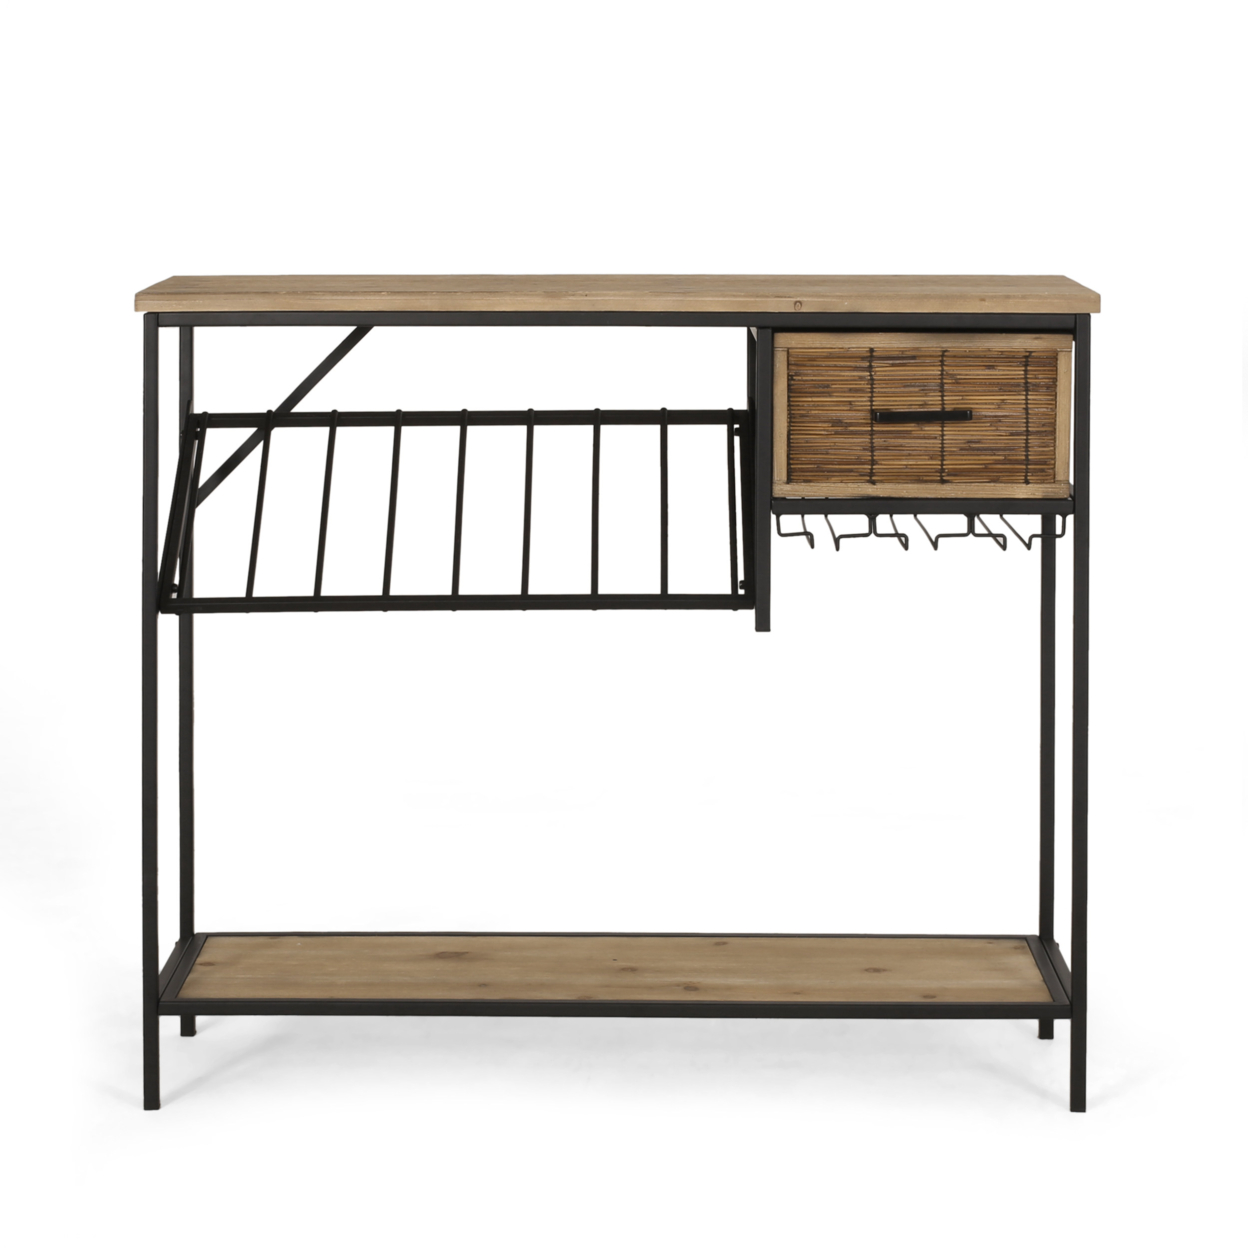 Broadwater Boho Industrial 8 Bottle Wine Rack Console Table With Storage, Natural And Black